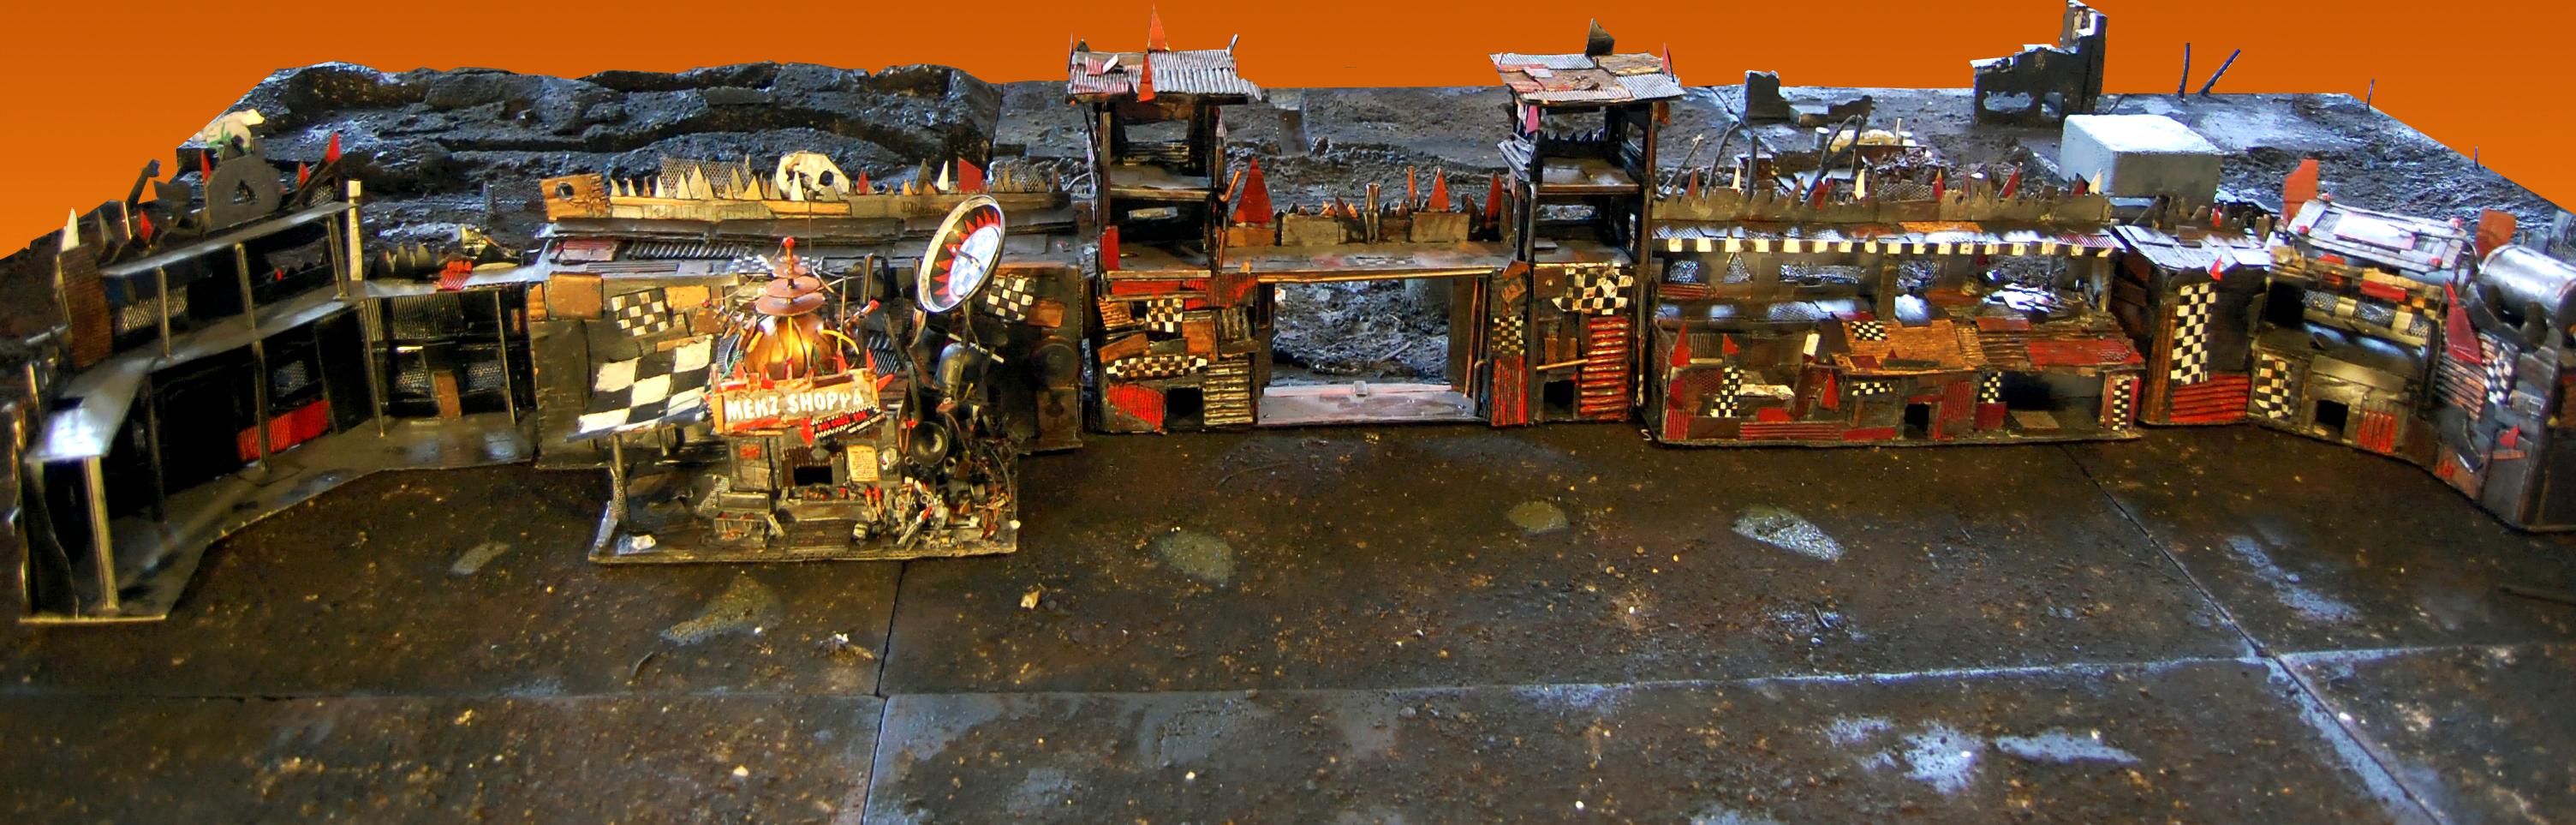 Orks, Terrain, Fortress from inside 